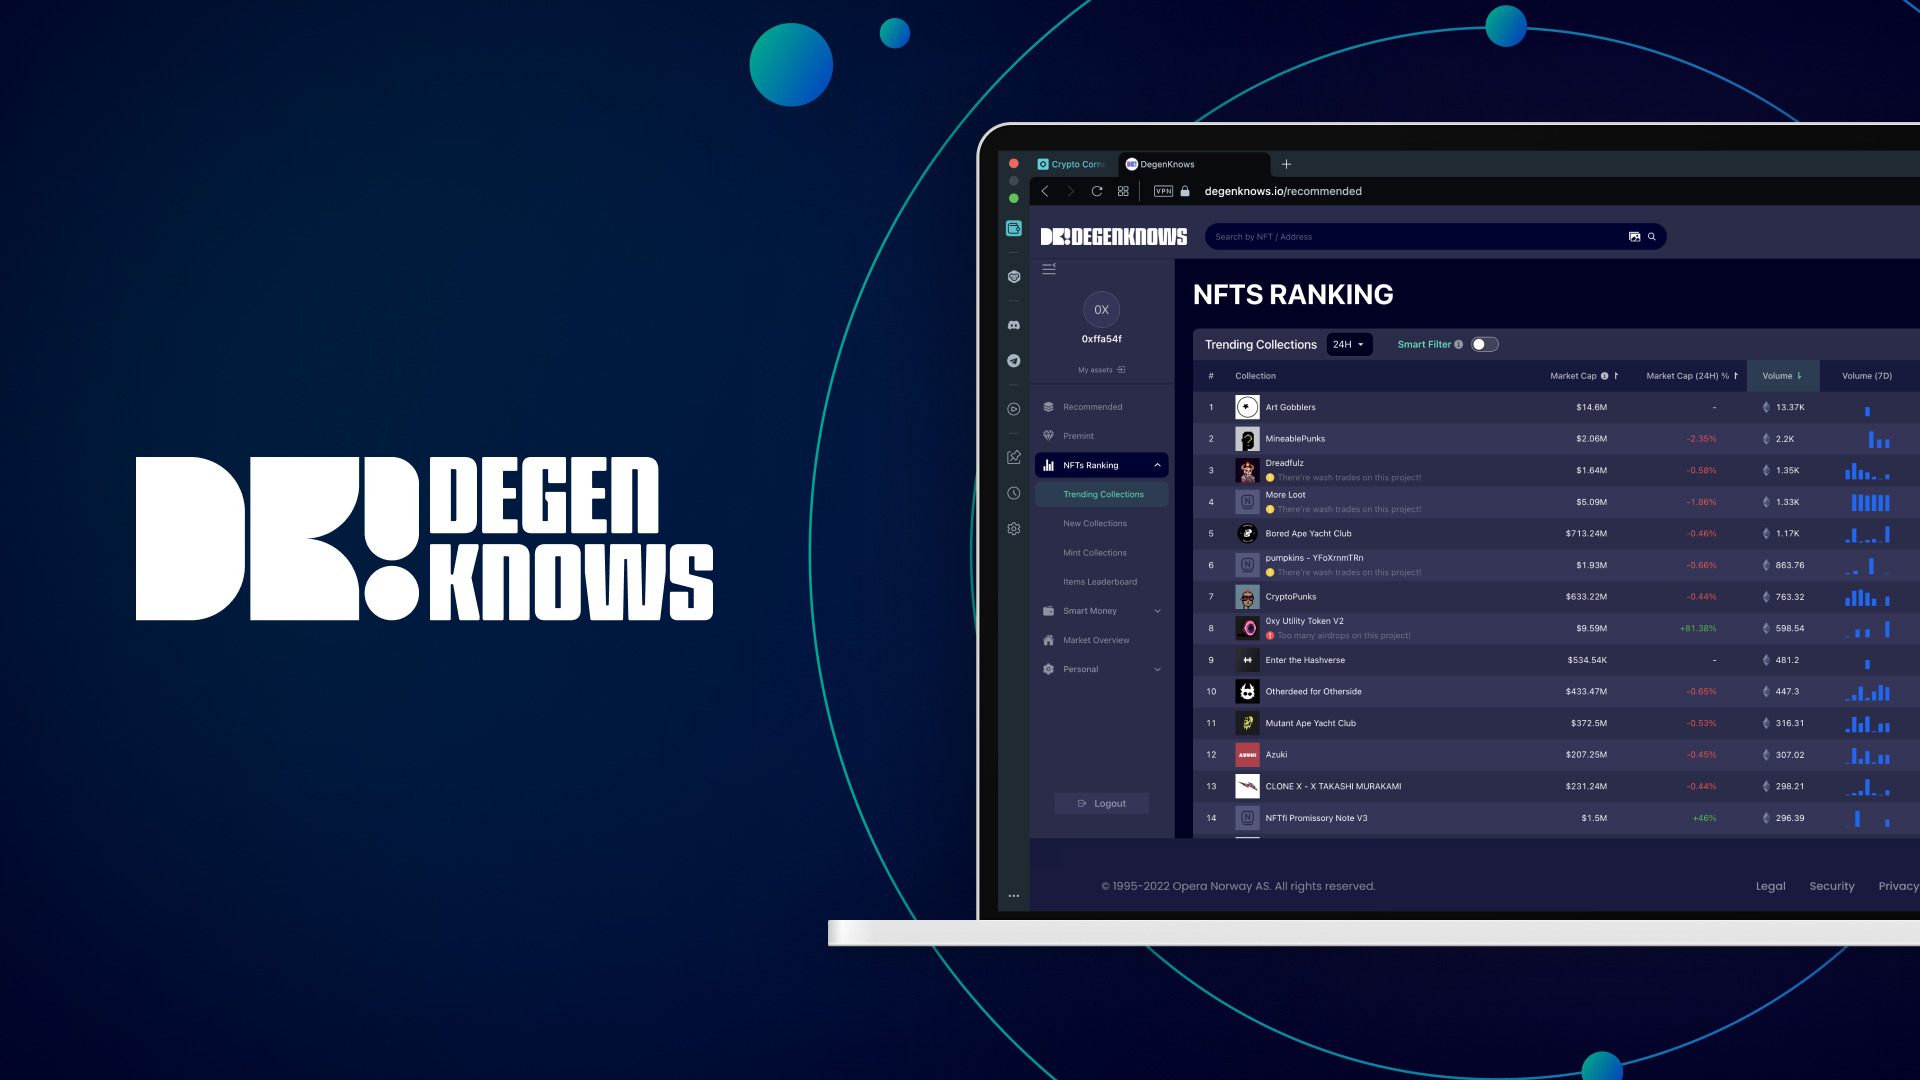 Opera's new deep analytics tool for NFTs premieres: DegenKnows